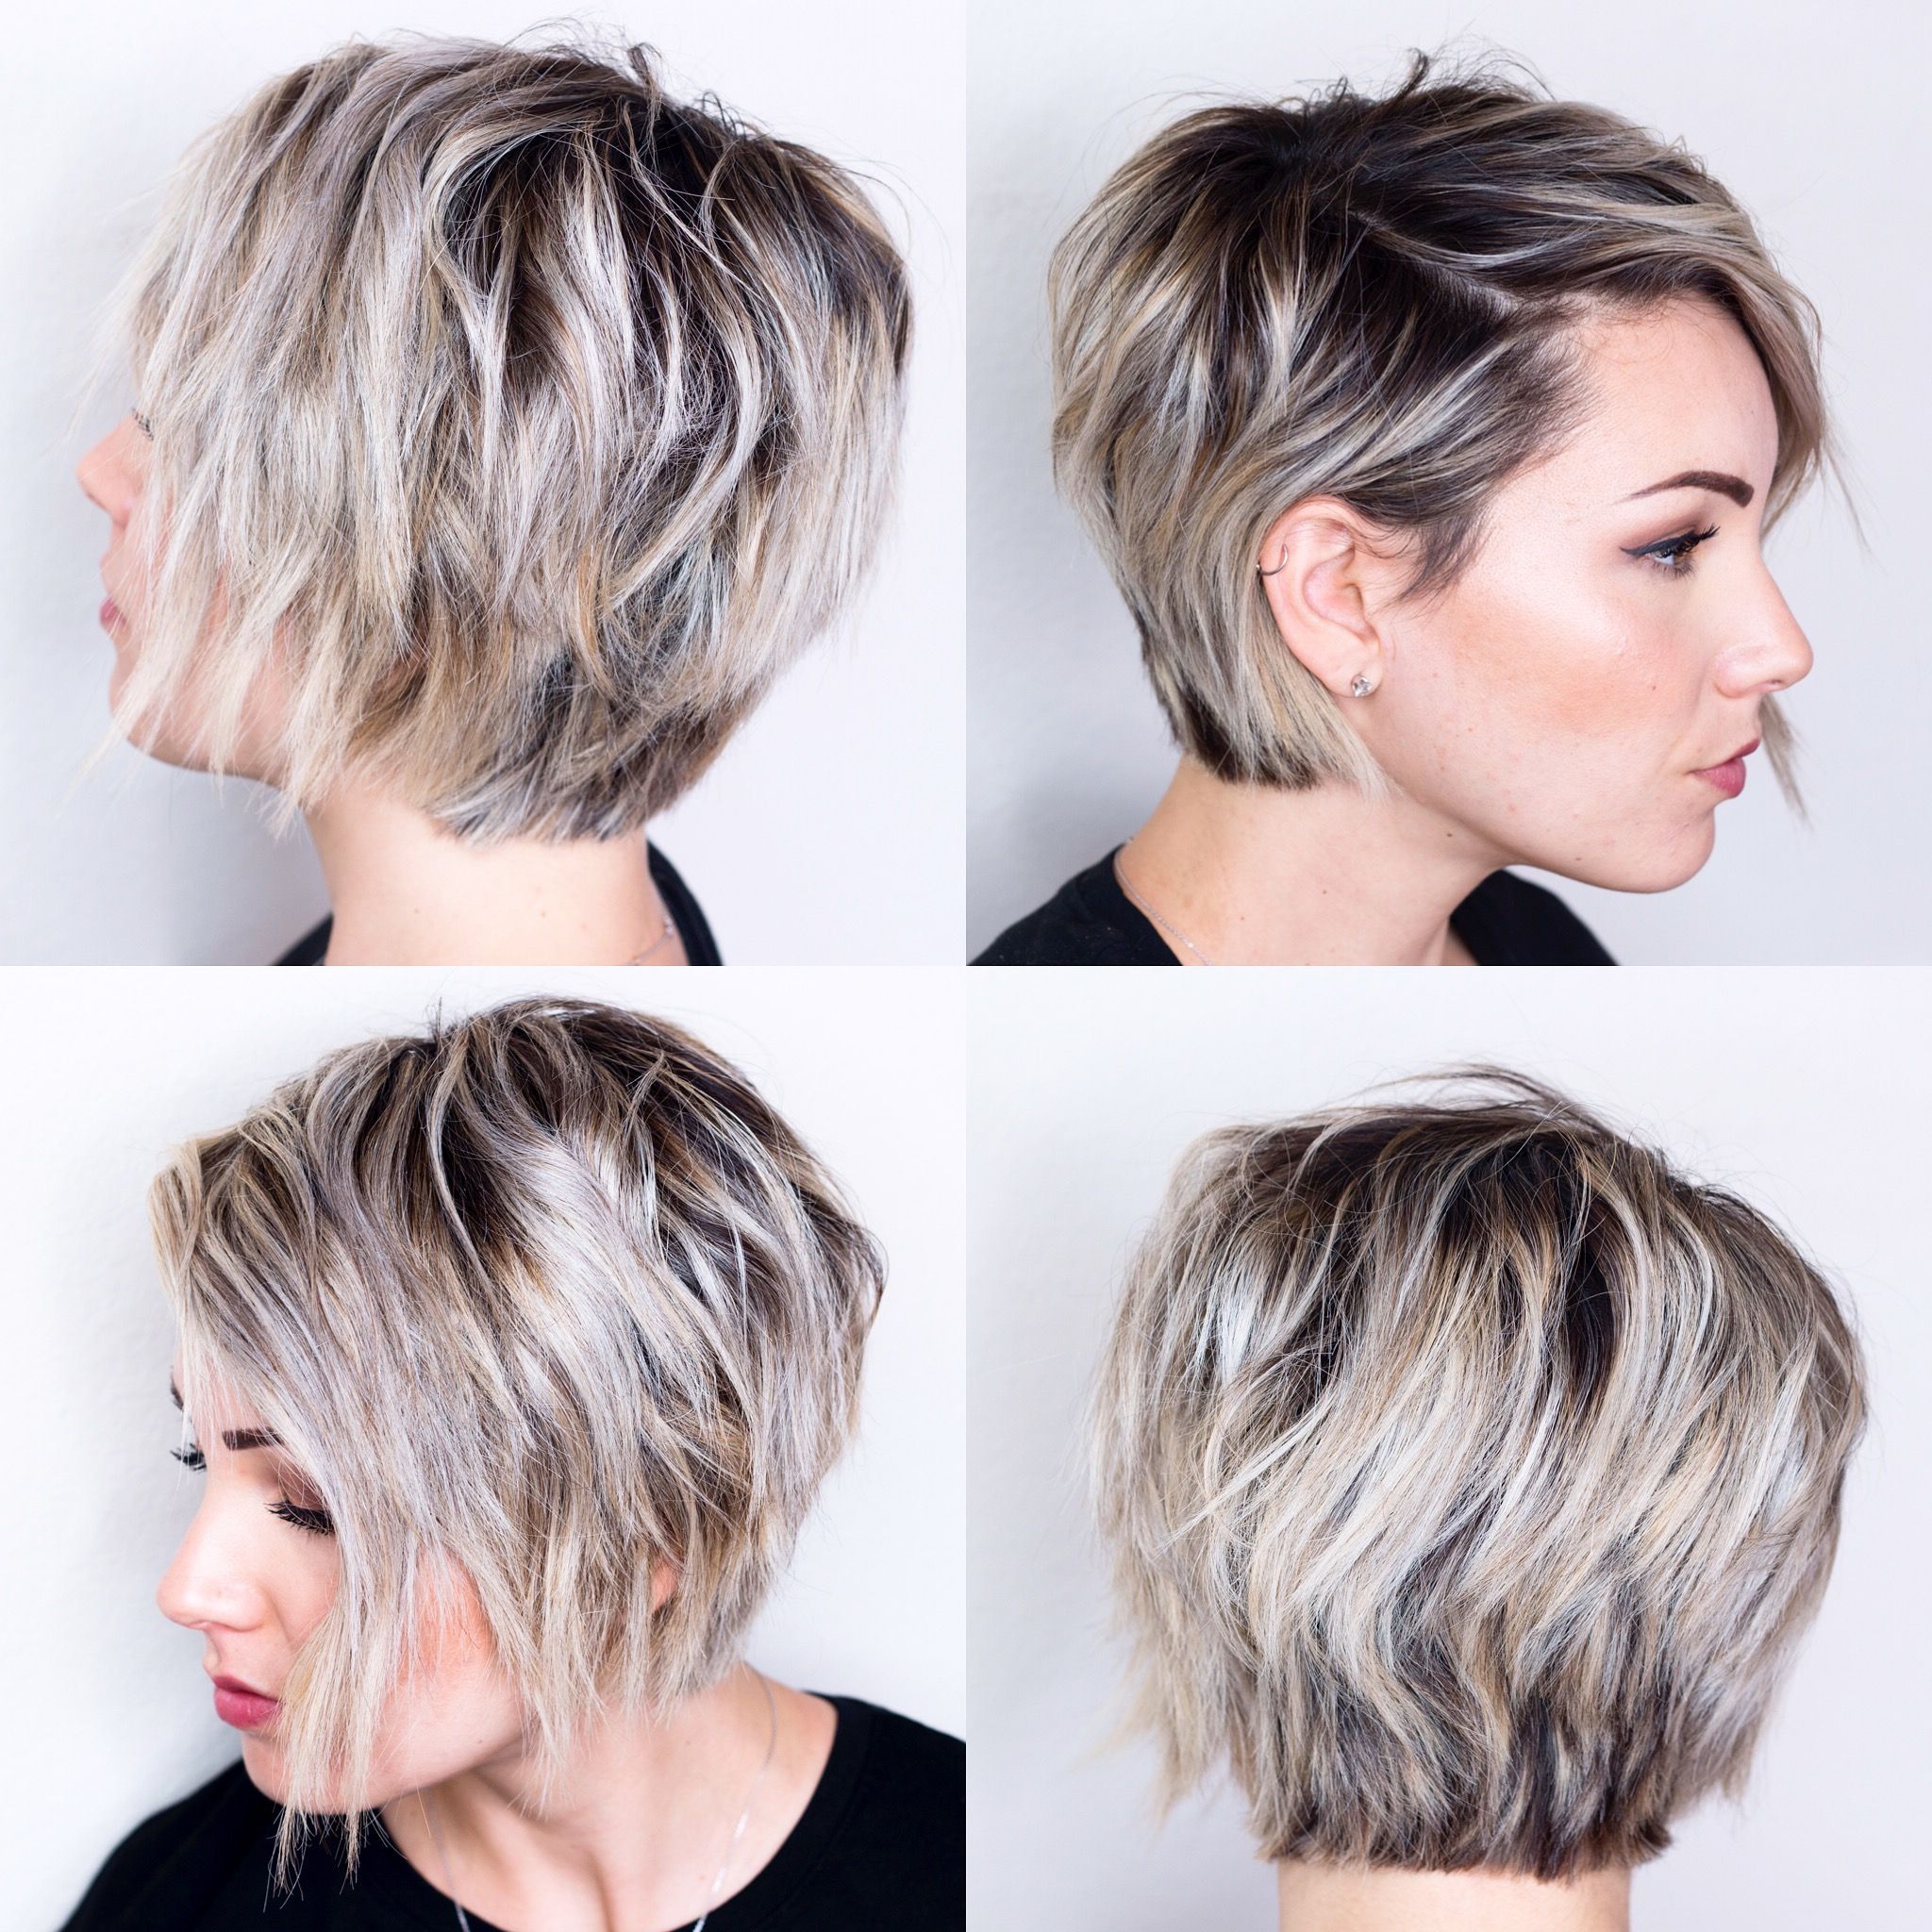 360 View Of Short Hair | H A I R In 2018 | Pinterest | Short Hair Intended For Short Haircut Oval Face (View 3 of 25)